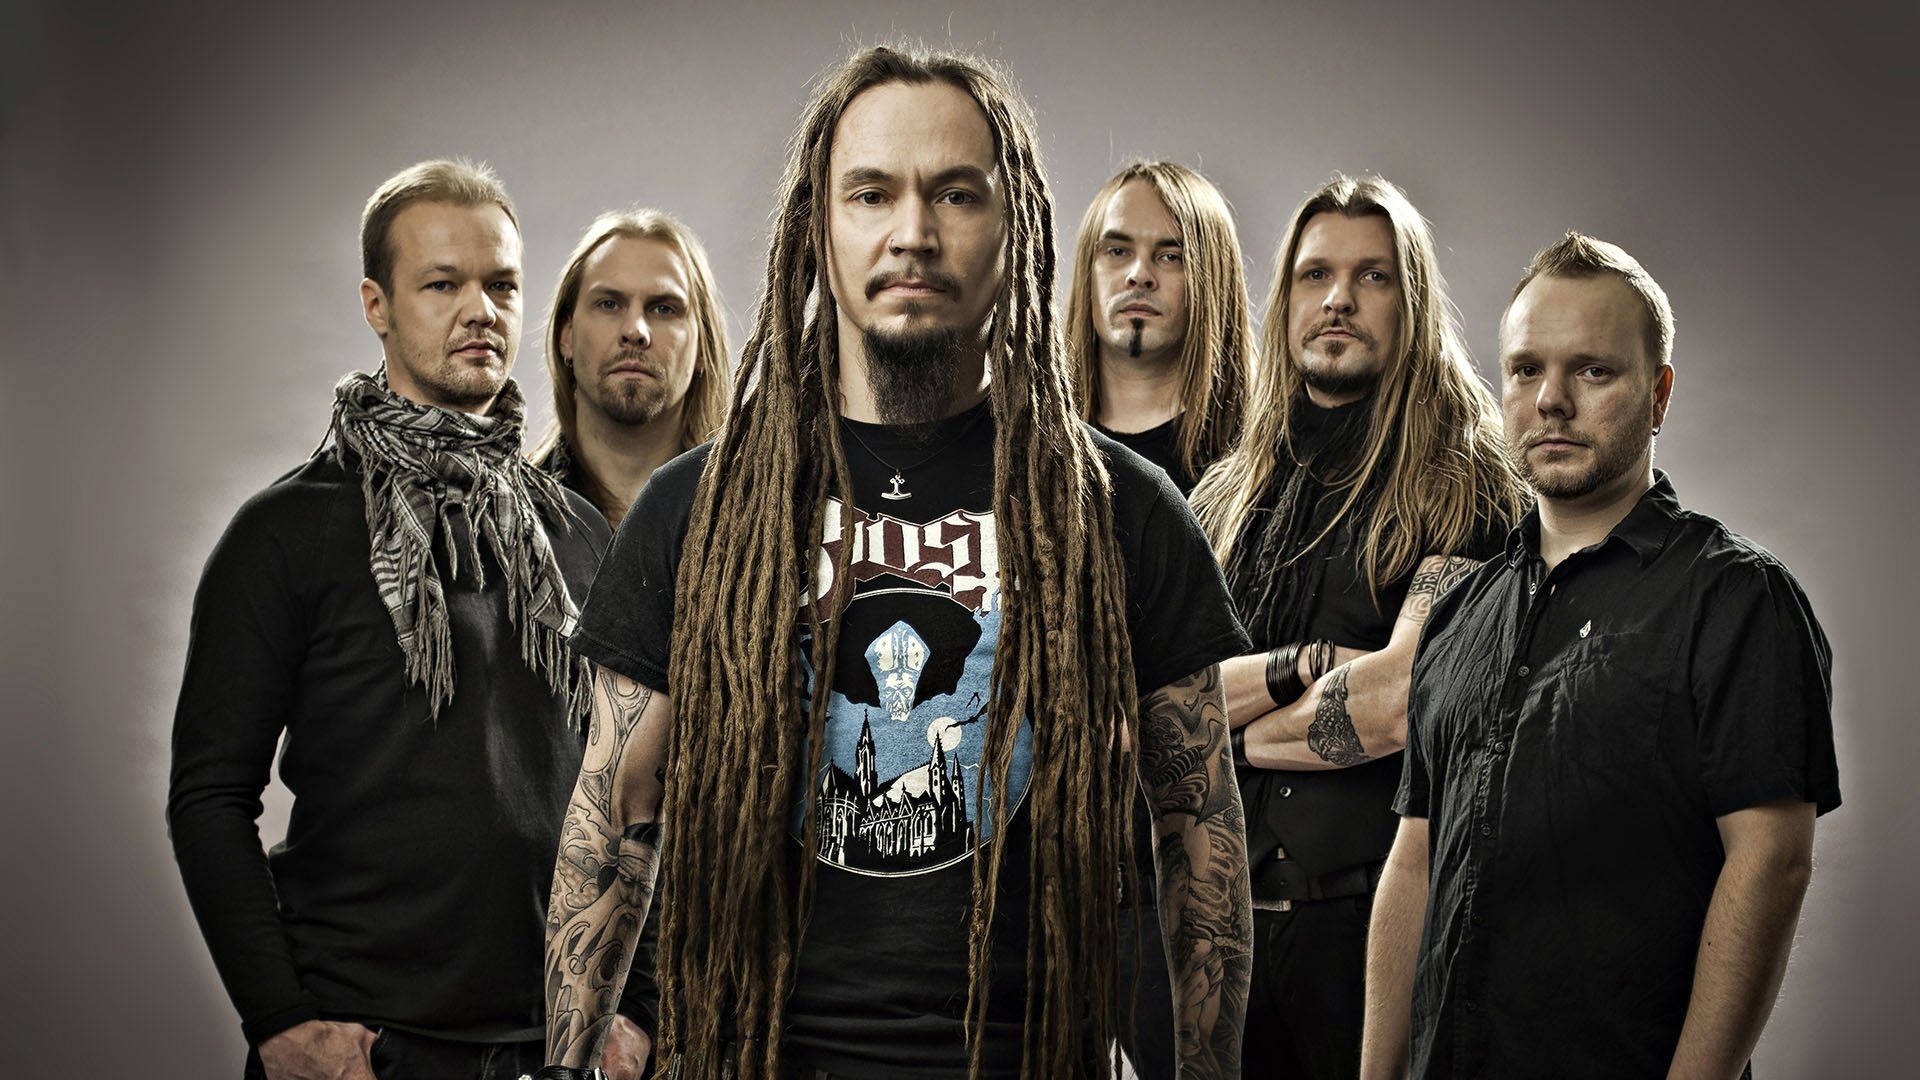 Awesome Amorphis free wallpaper ID:118669 for full hd 1920x1080 desktop